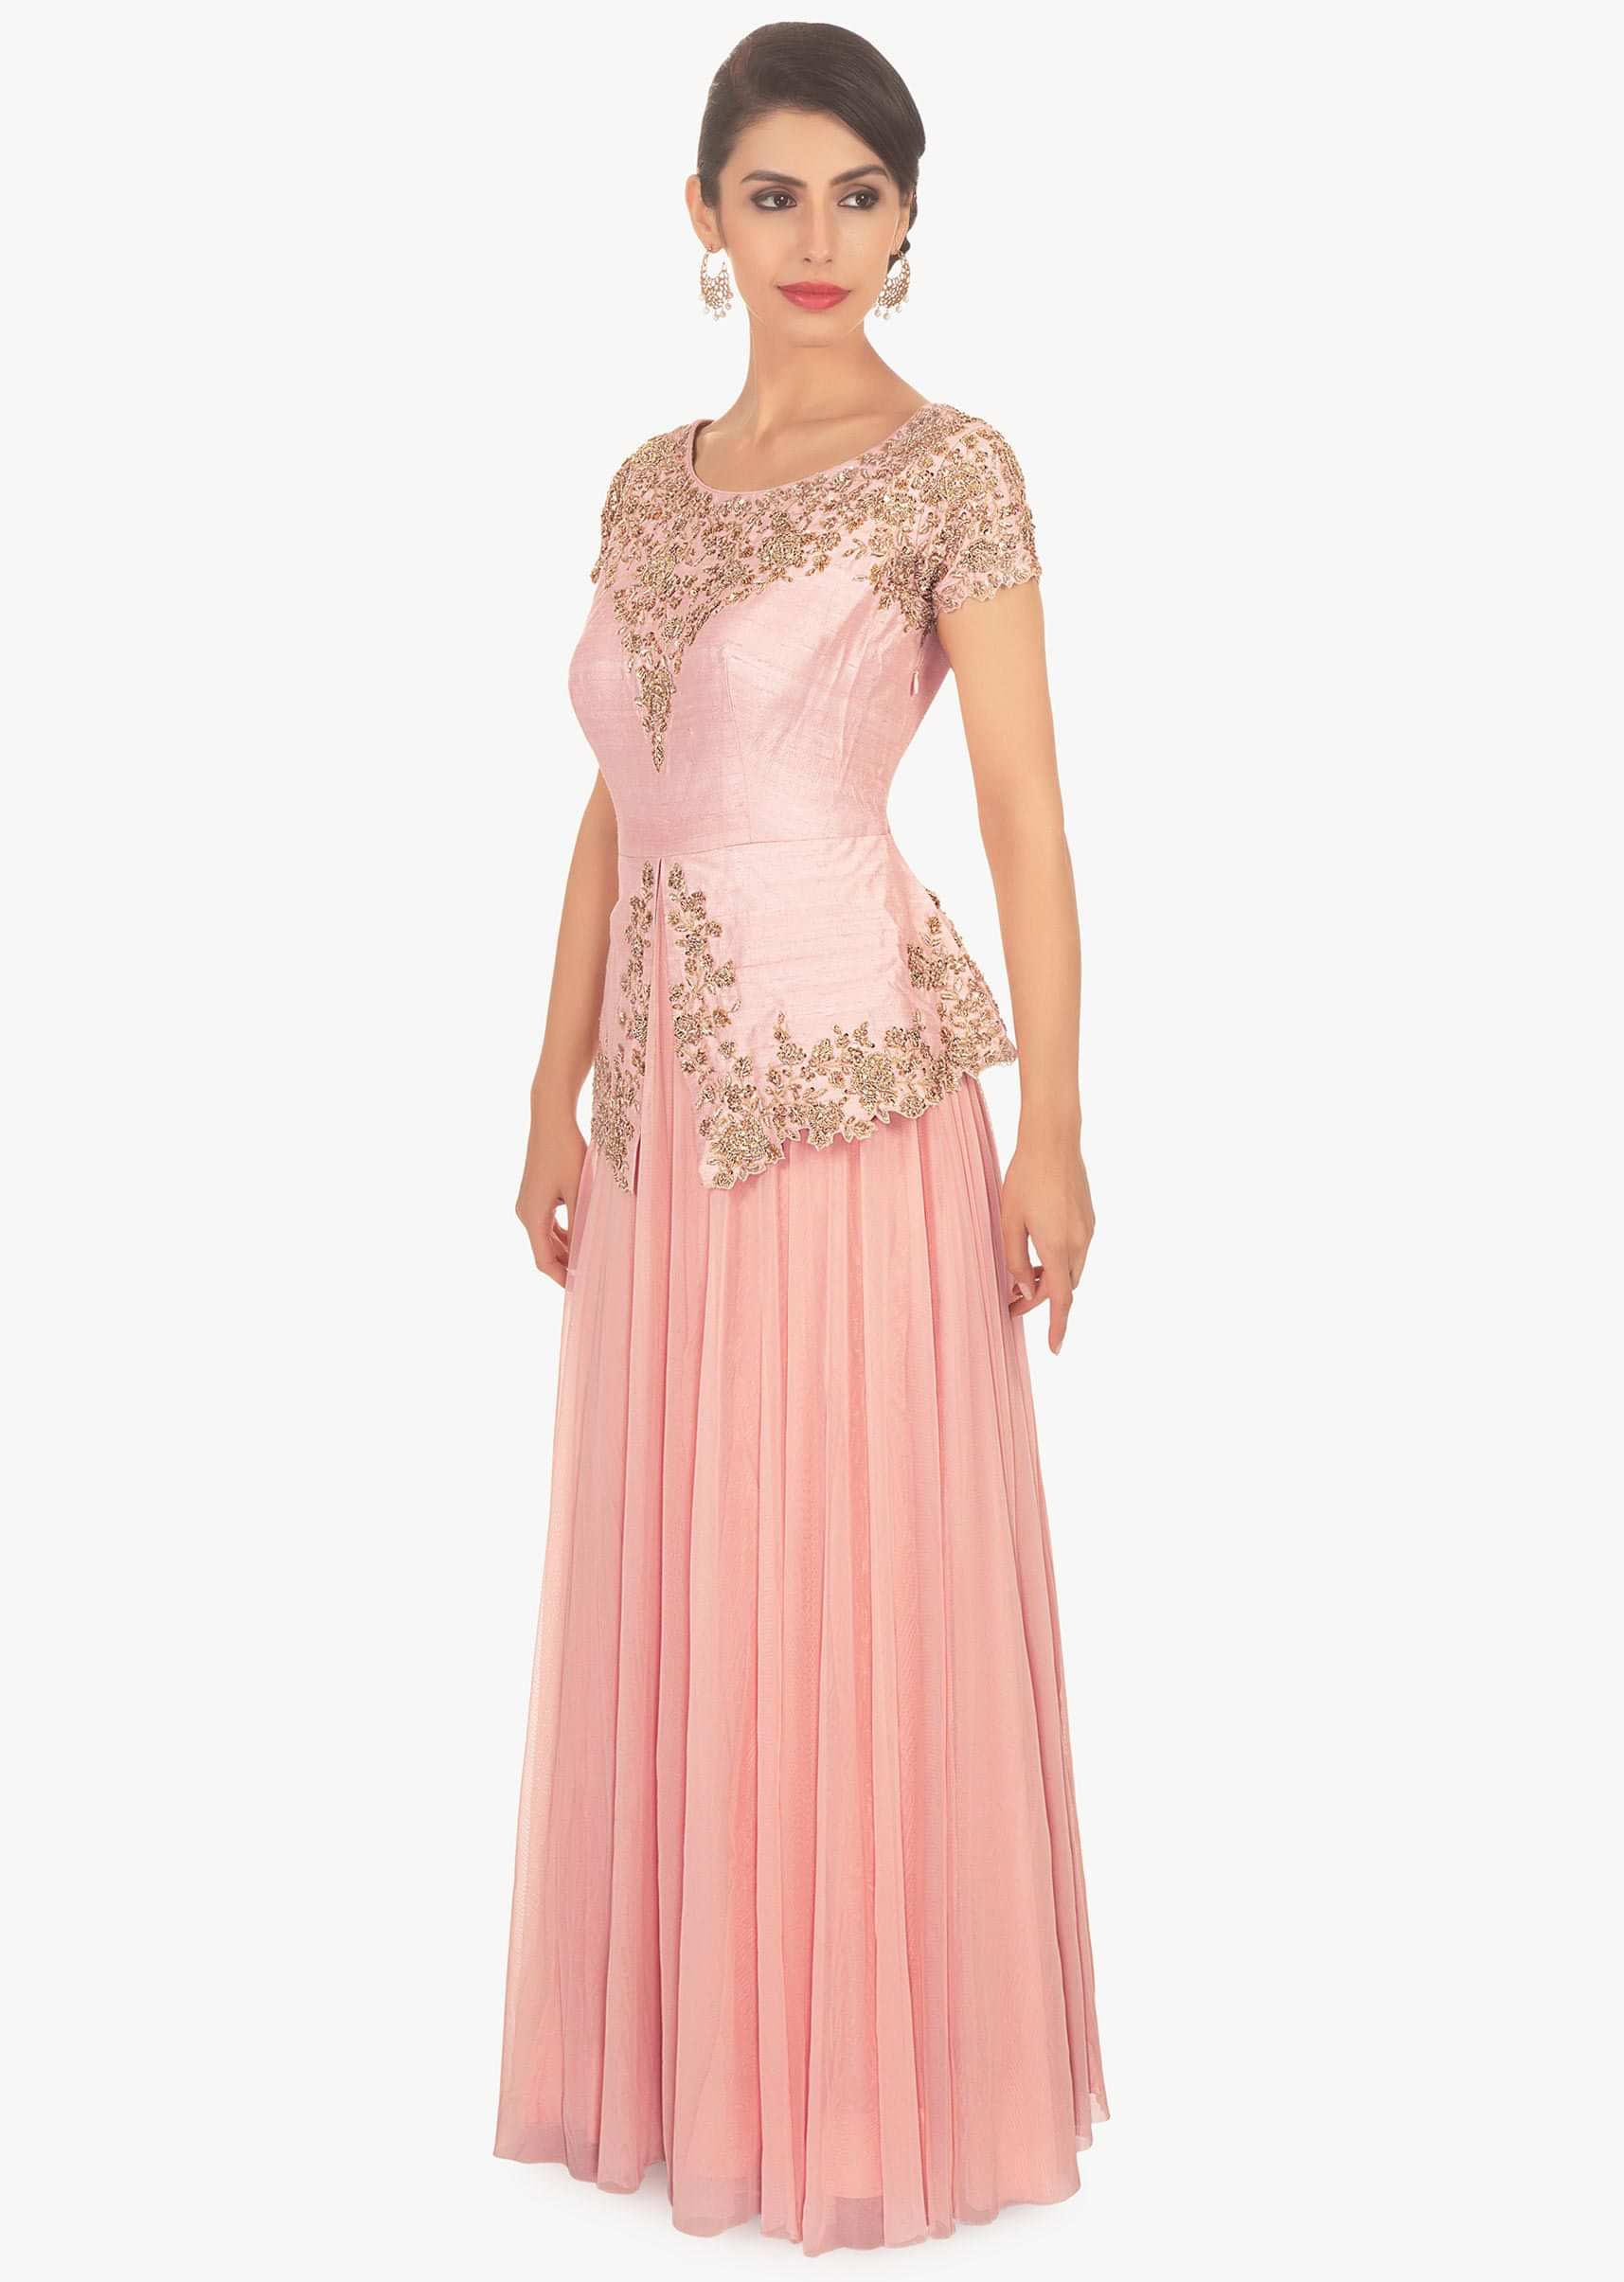 Peach long dress with pink bodice in peplum style